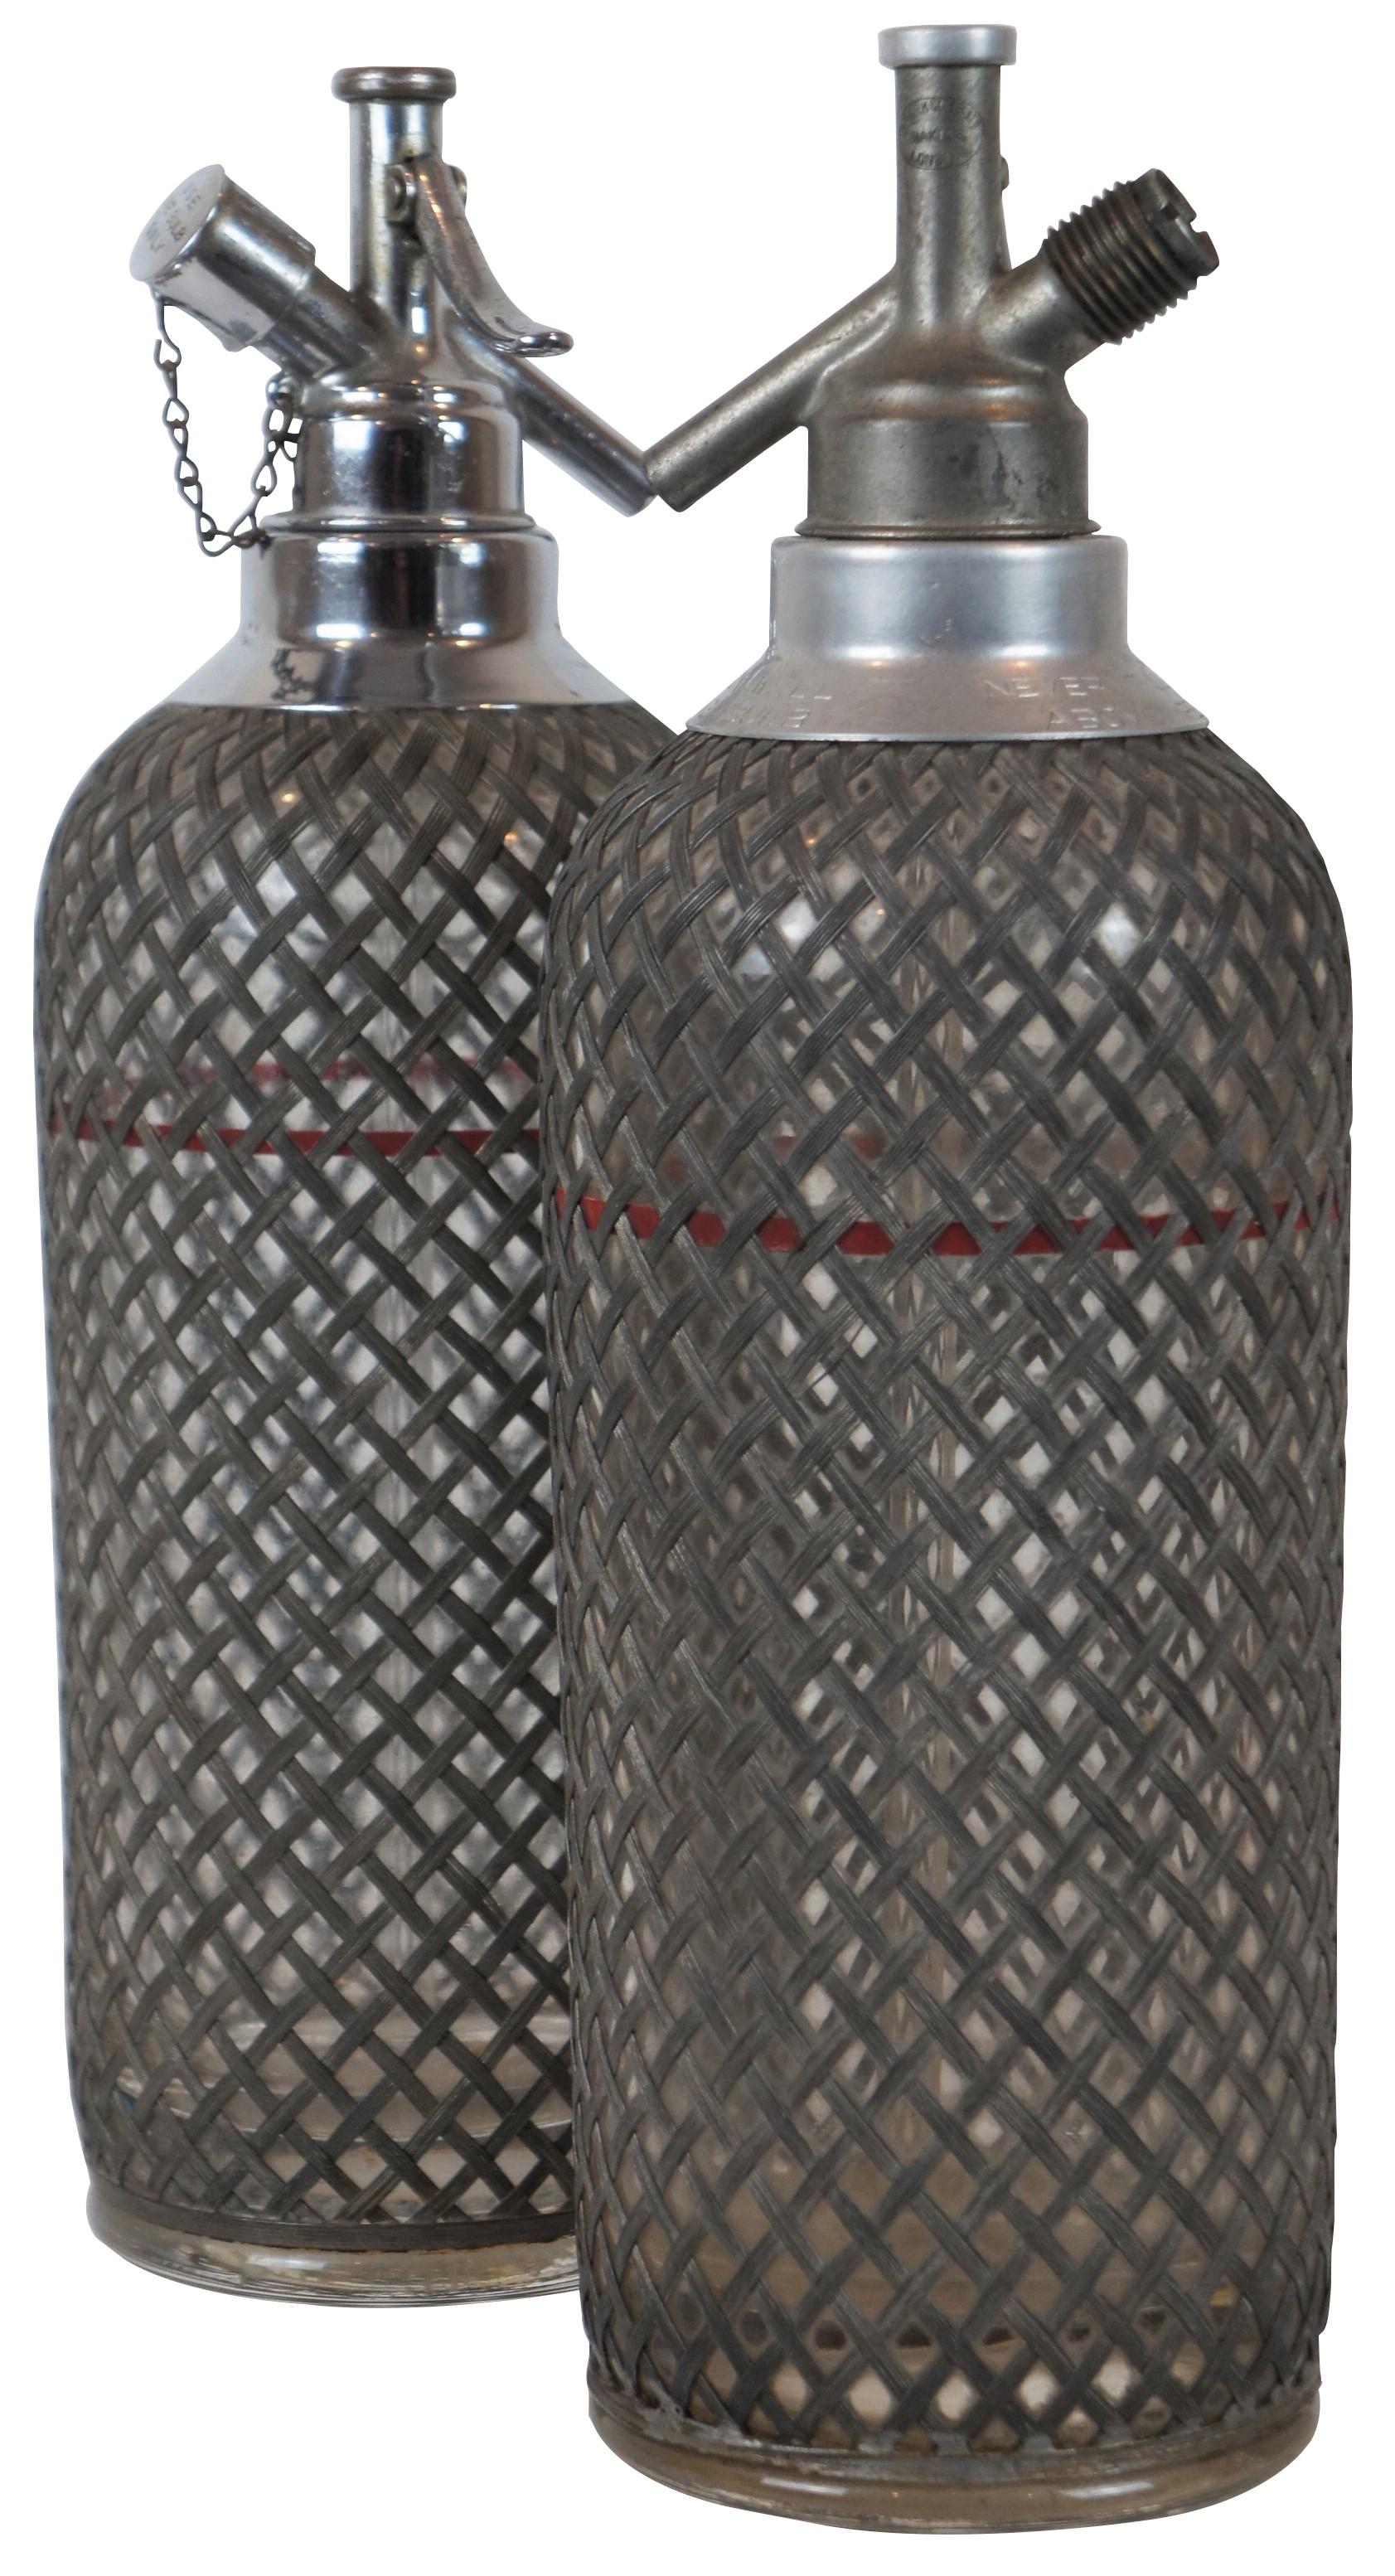 2 early 20th century art deco style Sparklets seltzer bottles or syphons, wrapped in a lattice of wire mesh. Glass marked along the bottom 